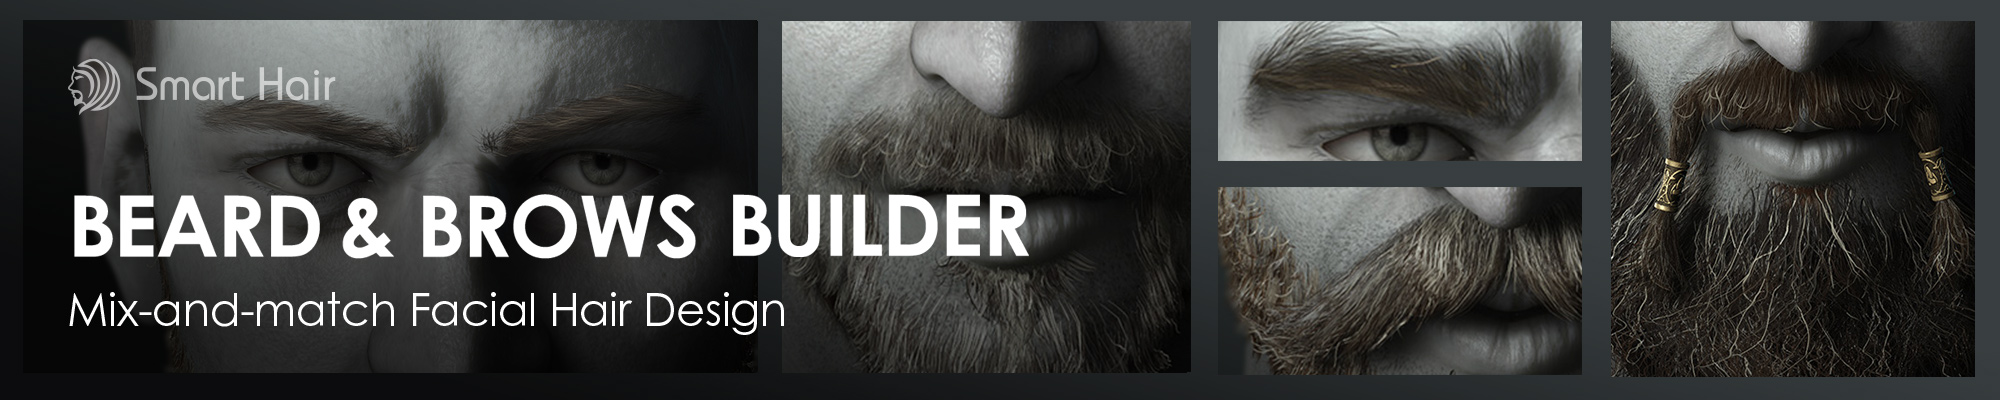 beard-and-brows-builder